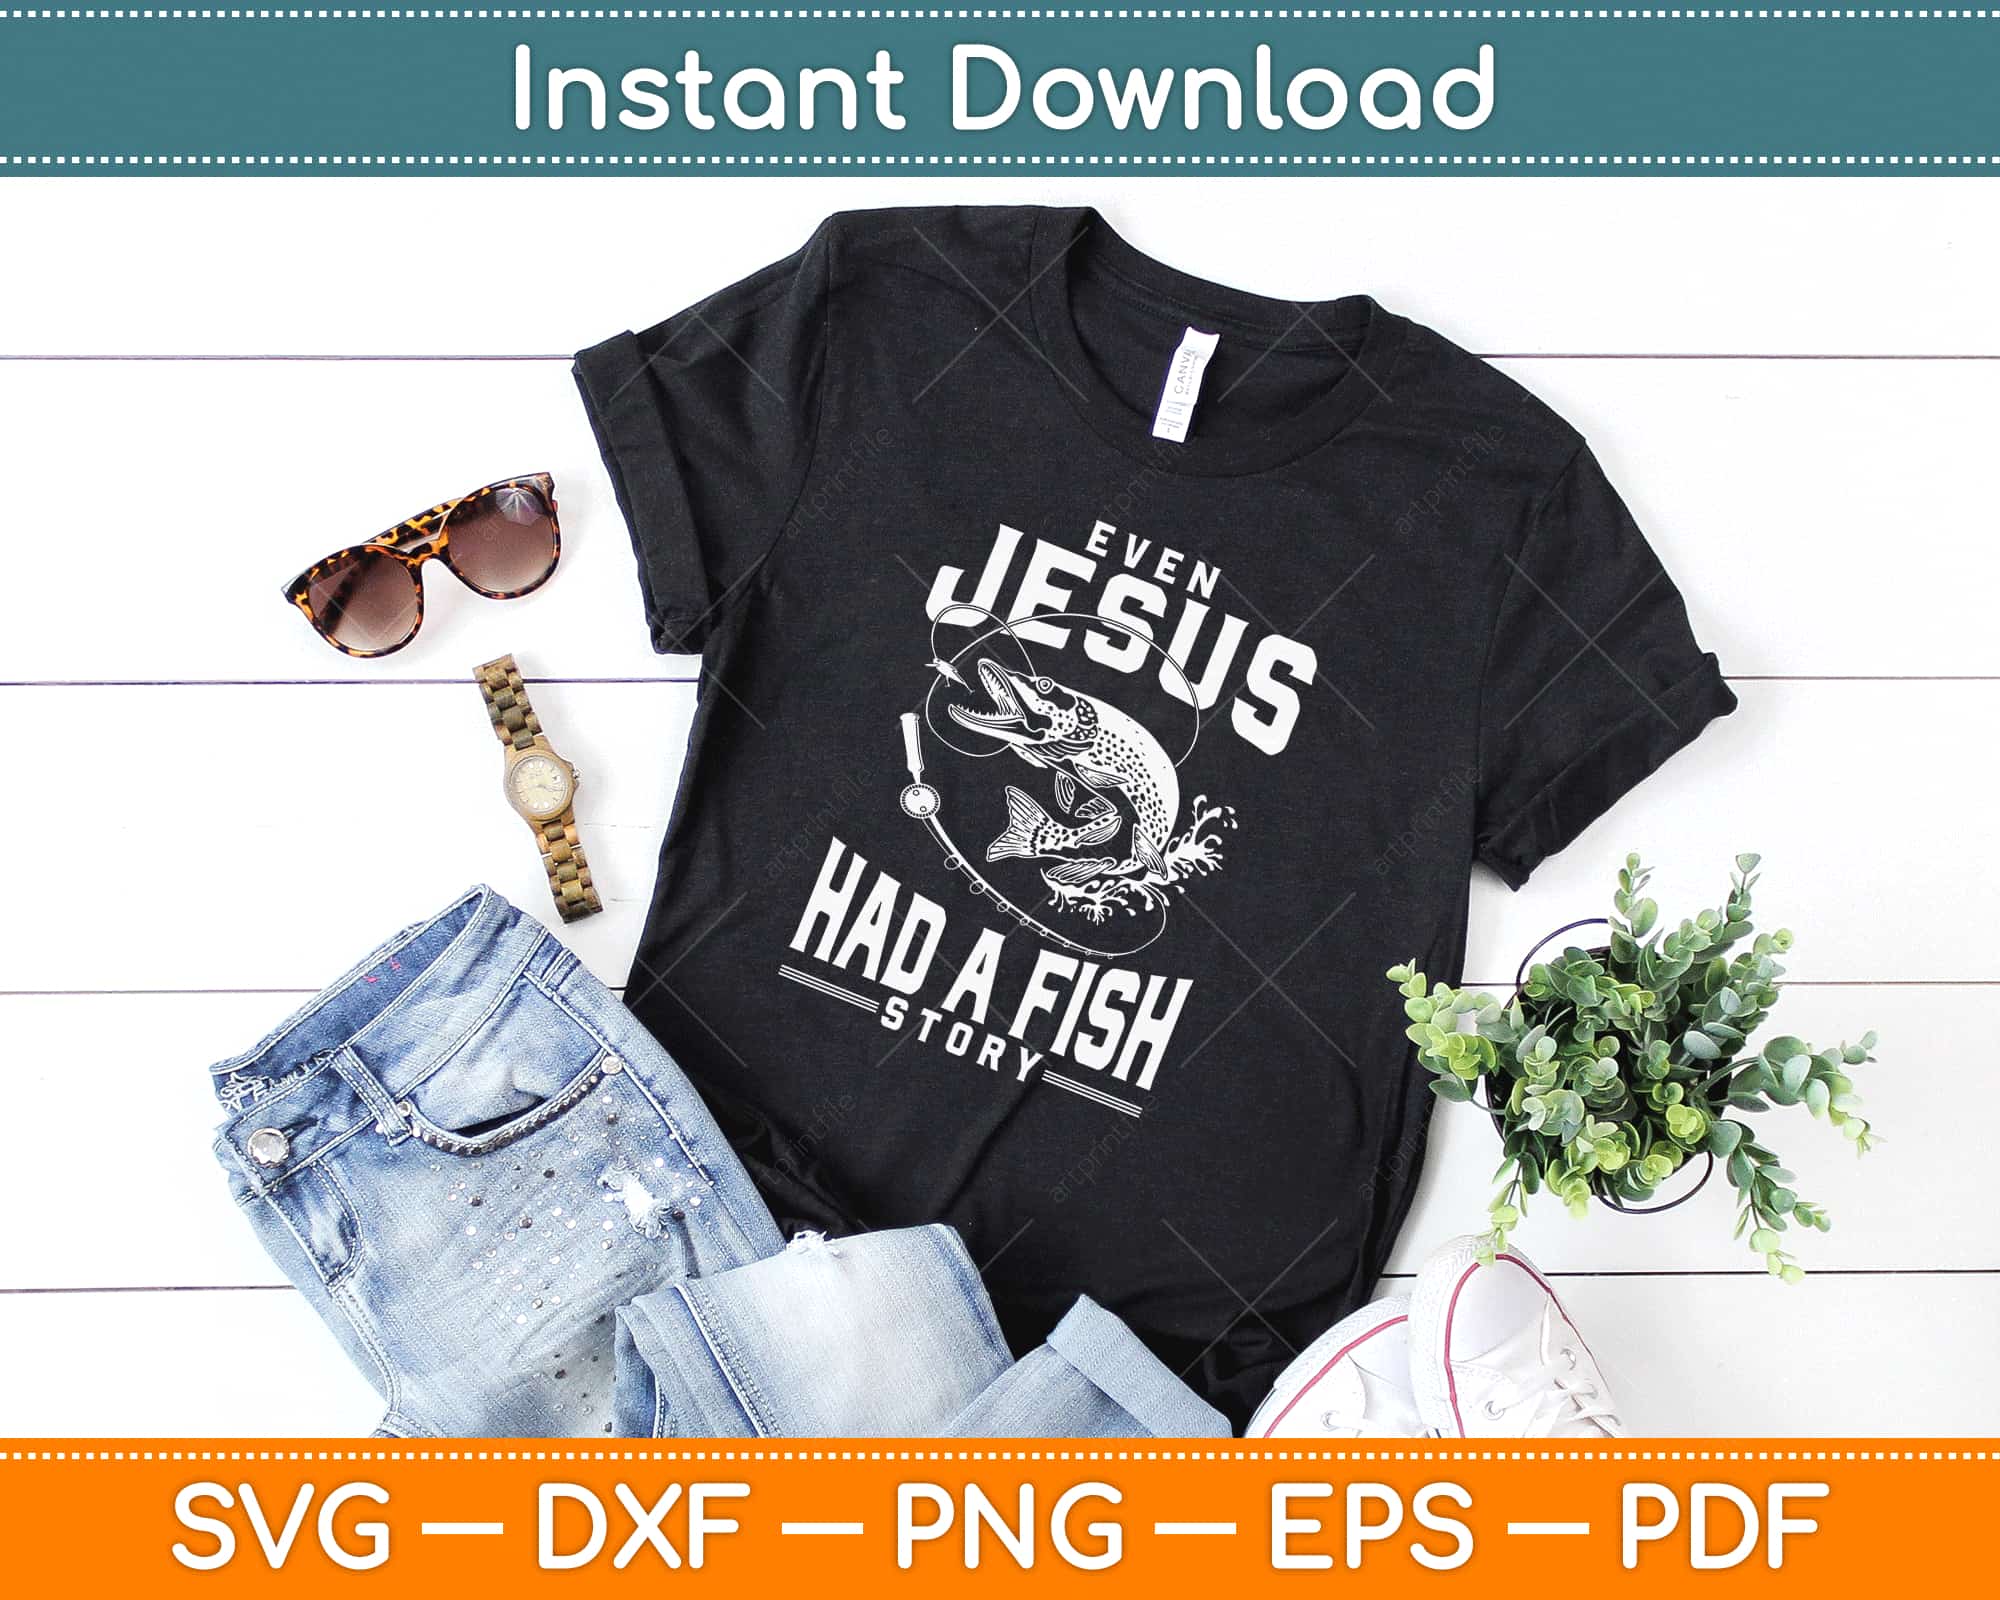 Fishing makes me happy SVG | Fishing SVG Cut File | Instant Download |  Commercial use | Fishing Saying | Quote | Shirt print | Jokes | Gift